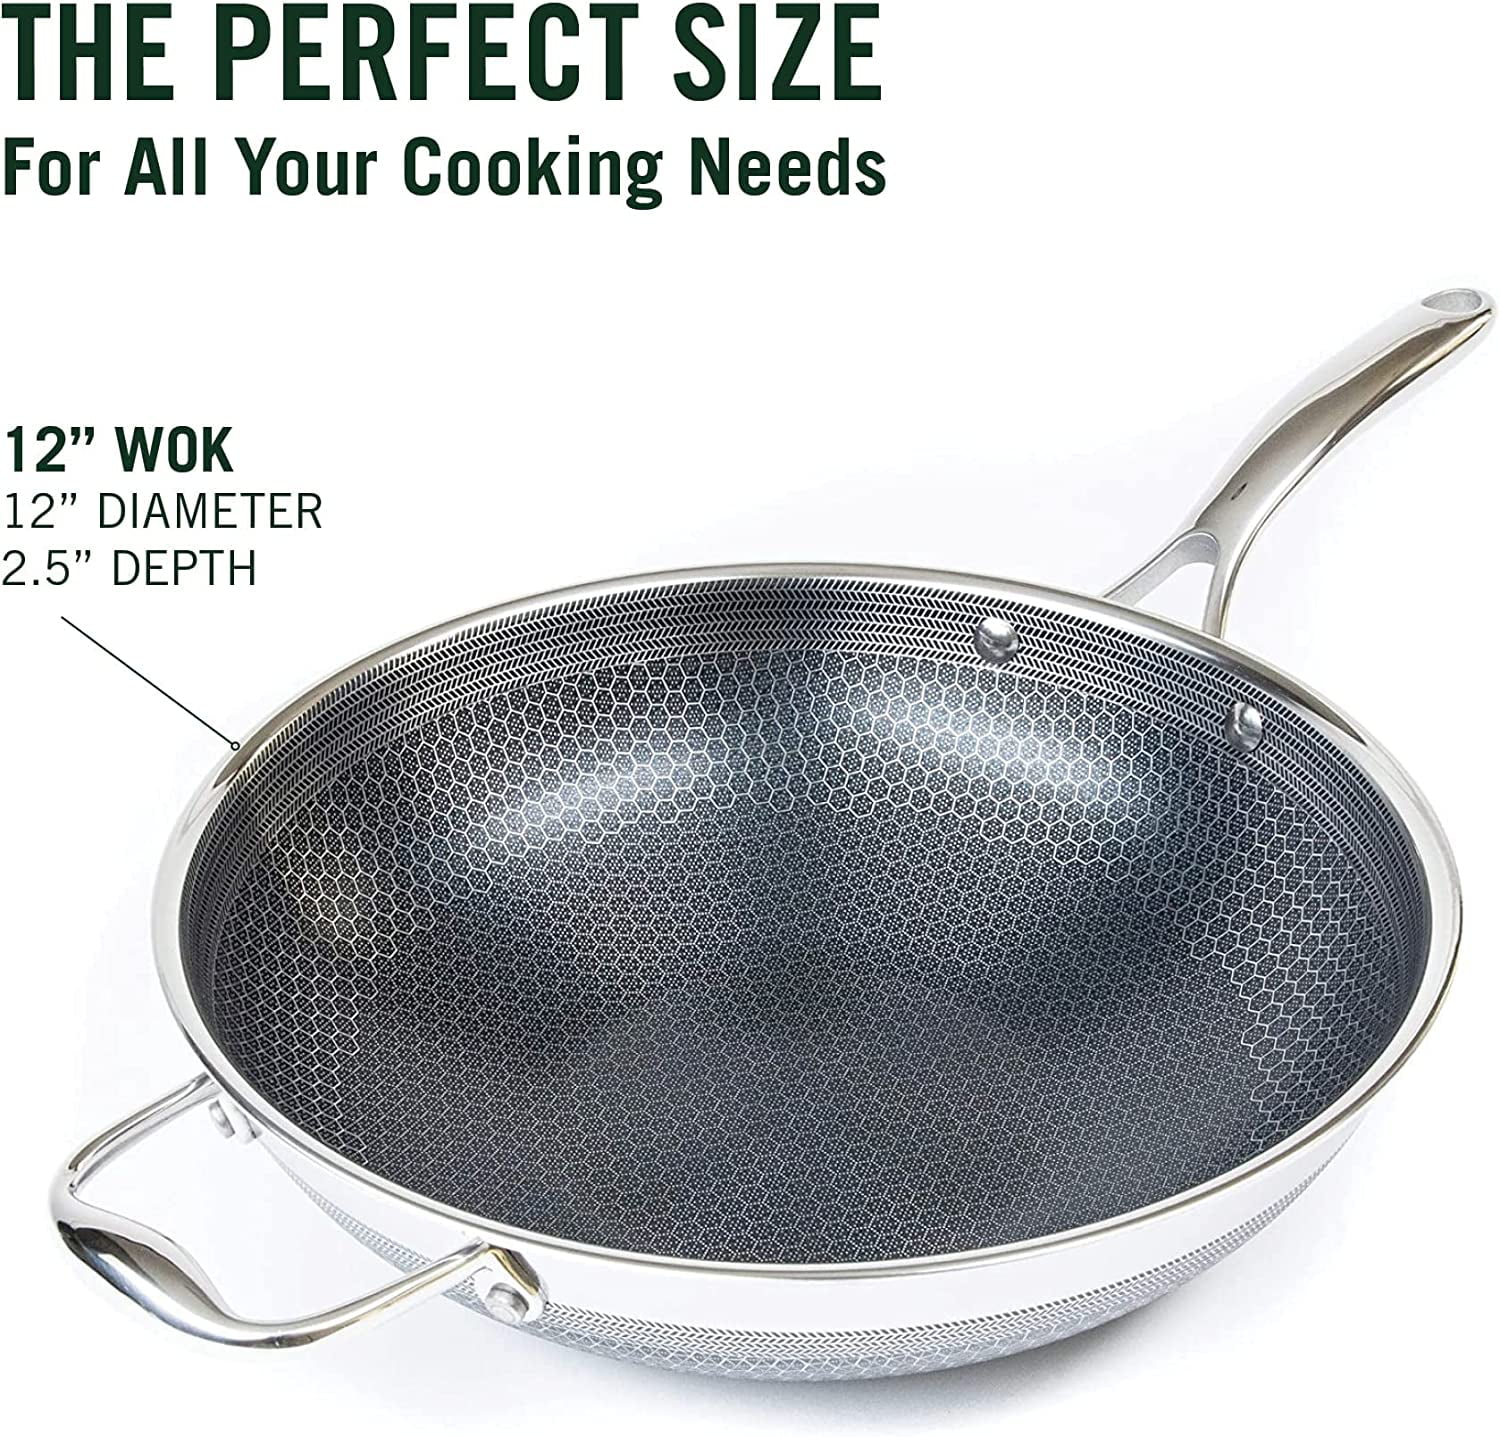 Brand New HexClad Cookware 12 inch Wok - Silver w/Lid